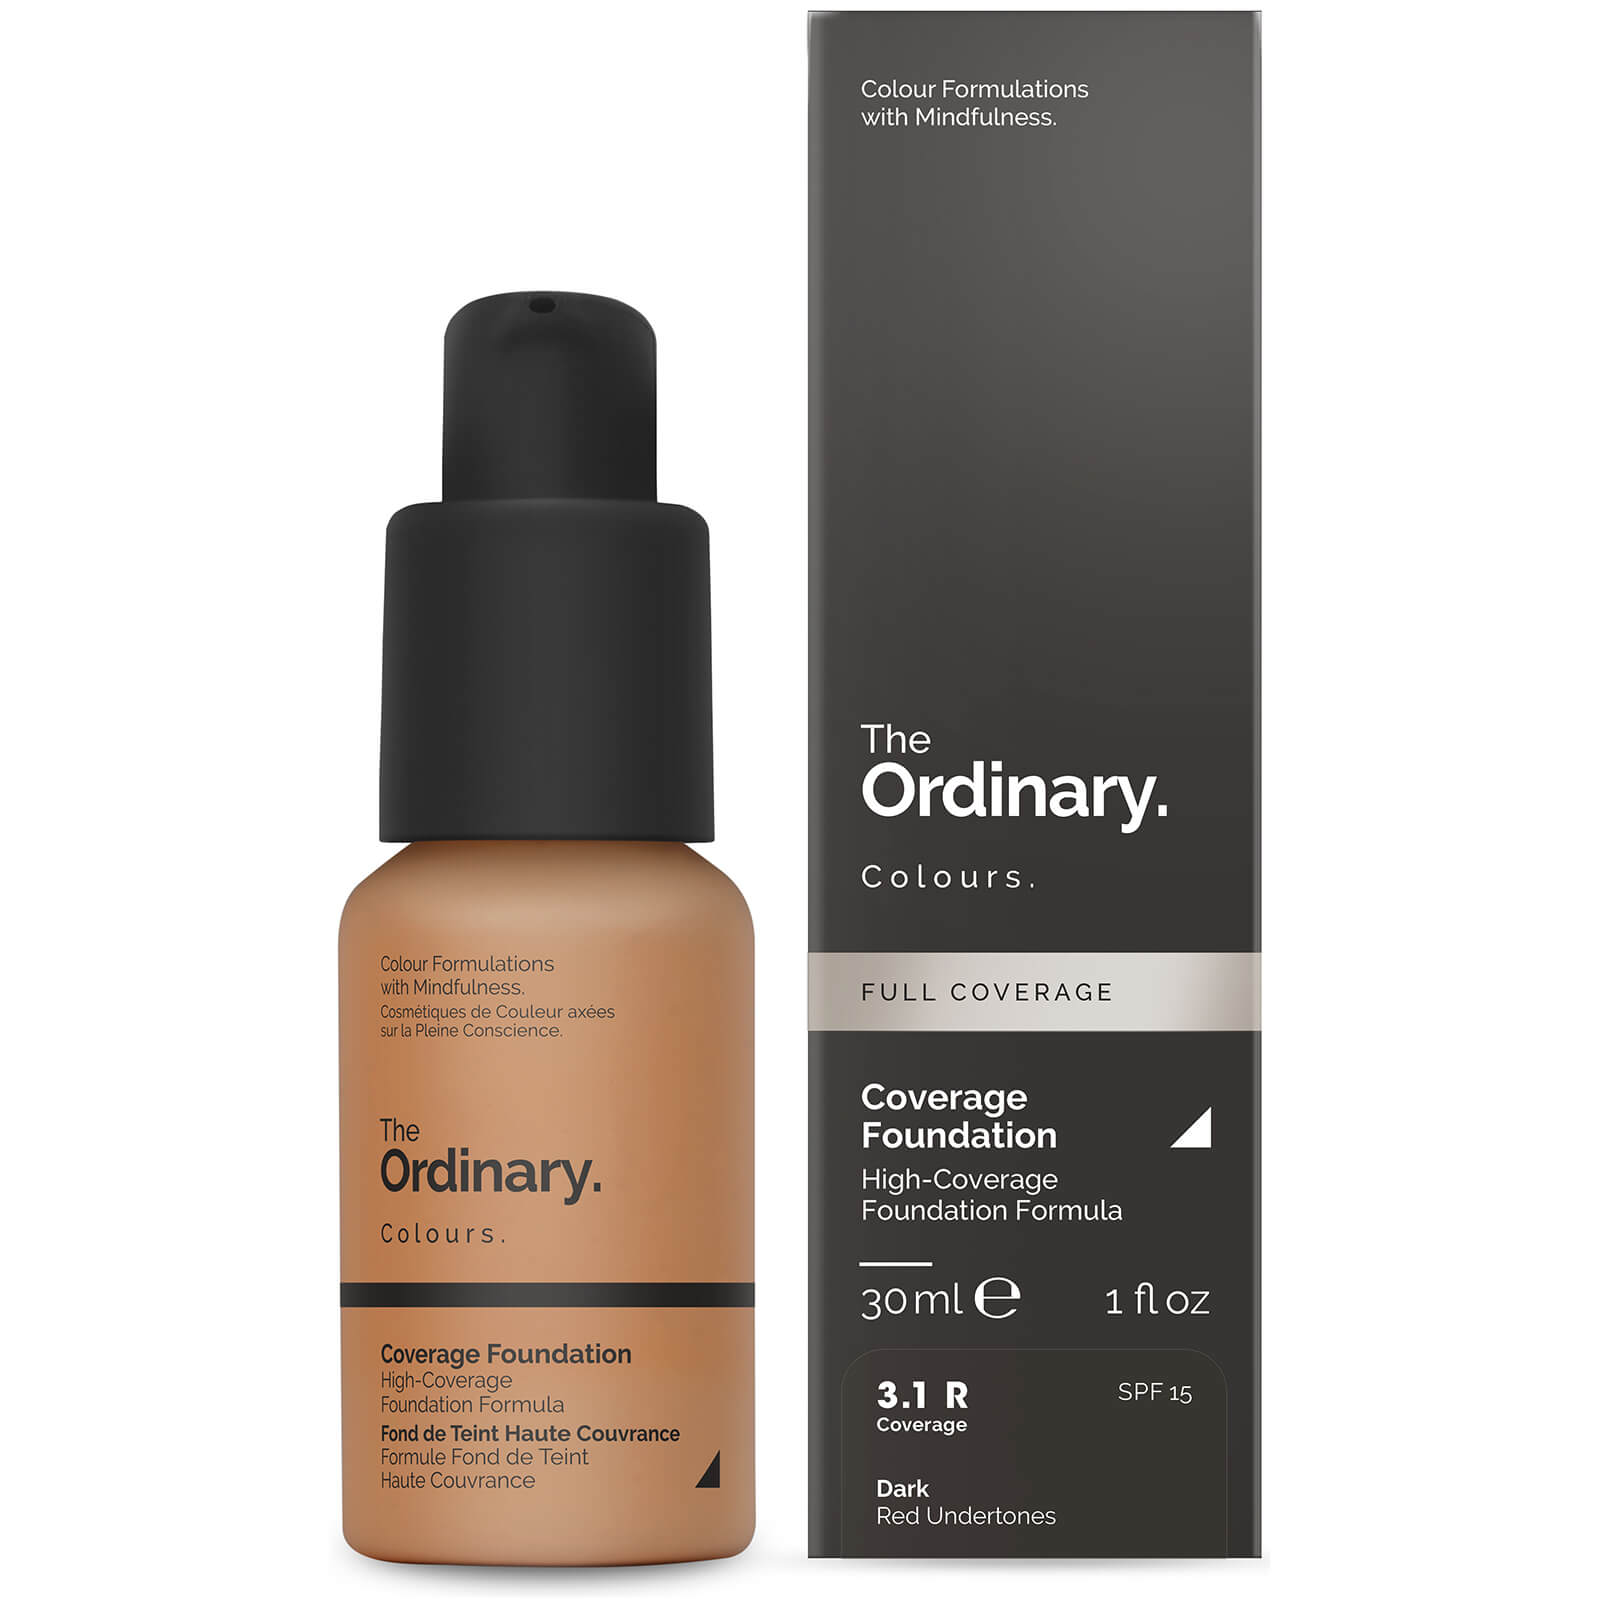 The Ordinary Coverage Foundation with SPF 15 by The Ordinary Colours 30ml (Various Shades) - 3.1R